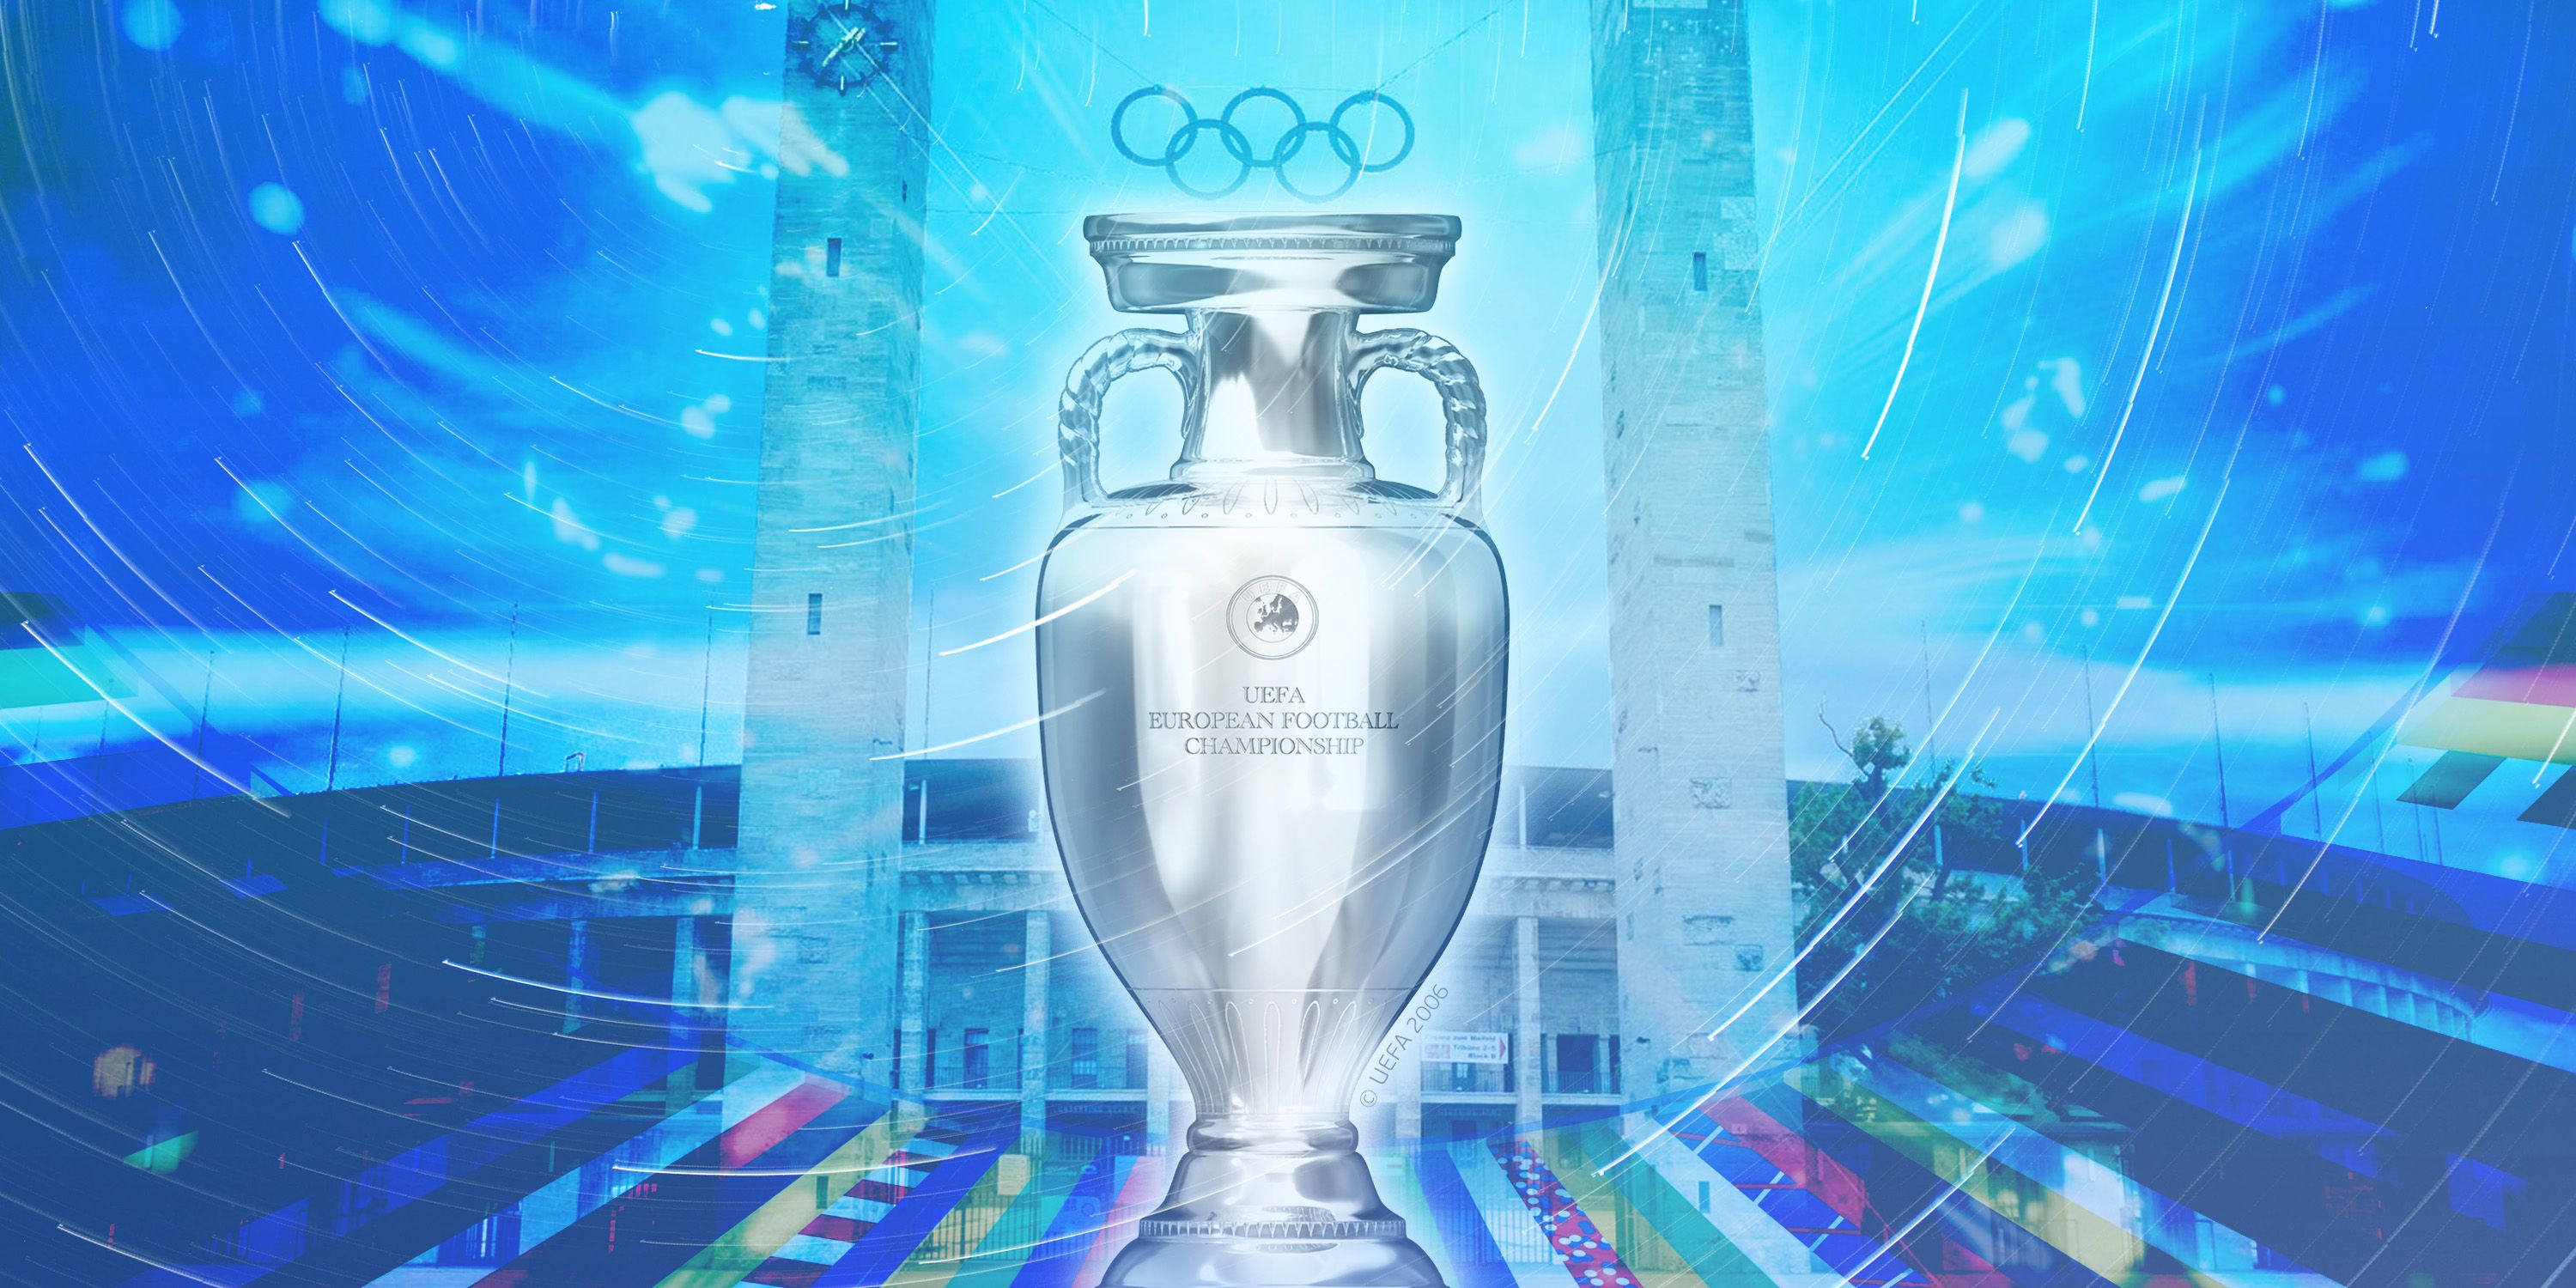 A collage featuring the EURO trophy and the Olympiastadion in Berlin, Germany.